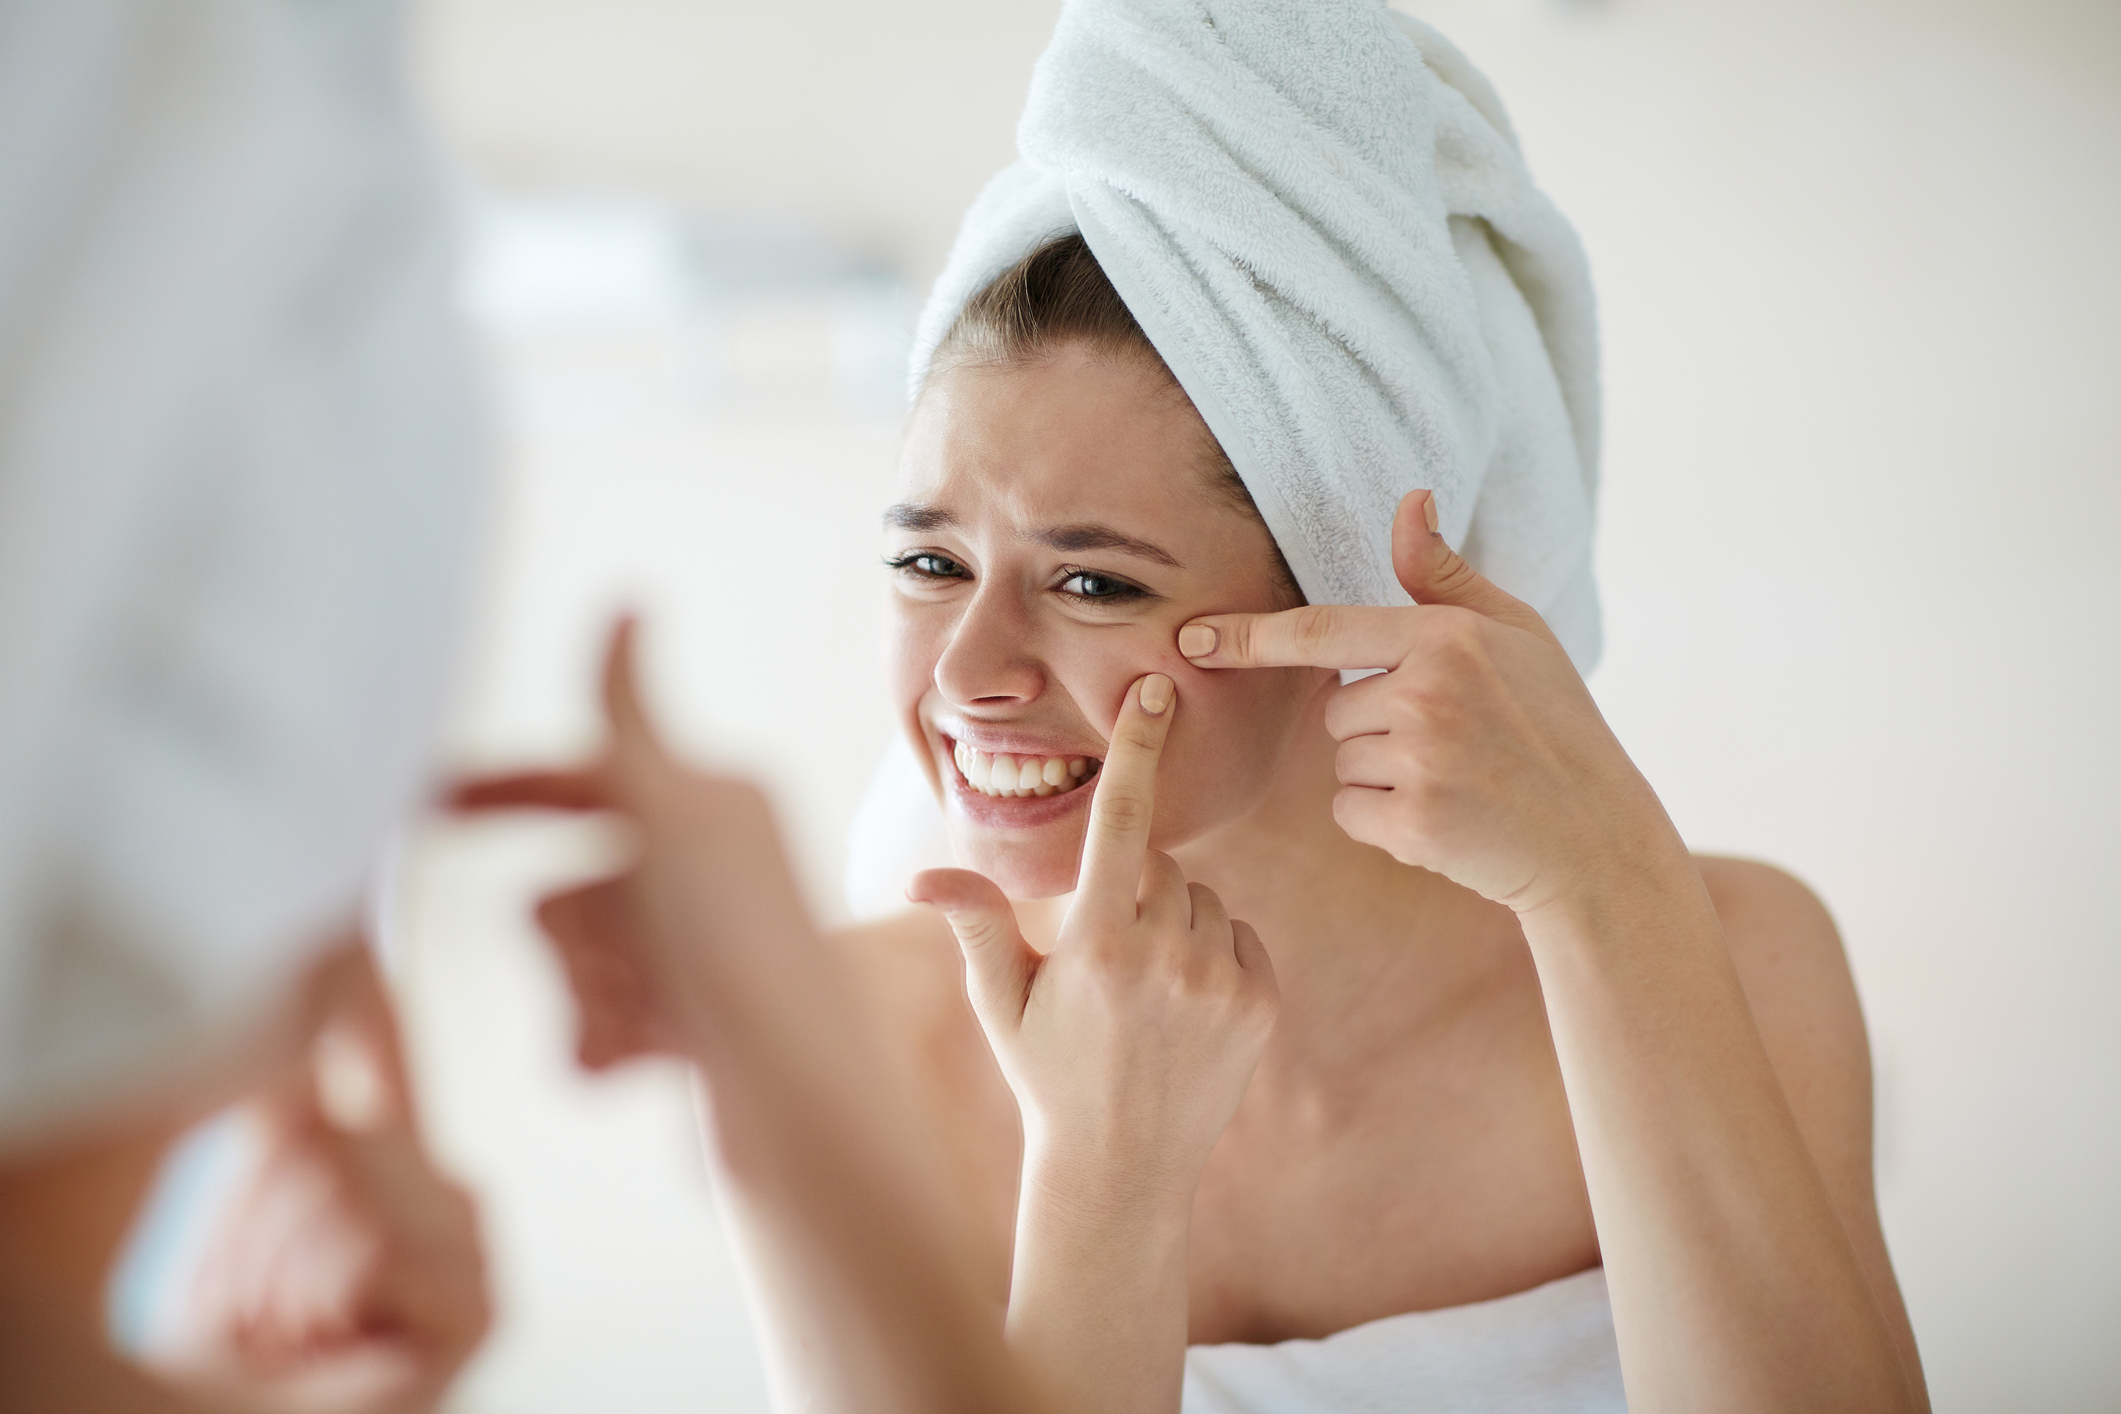 A woman with acne on her face, squeezing out her pimples, has a towel on her hair.